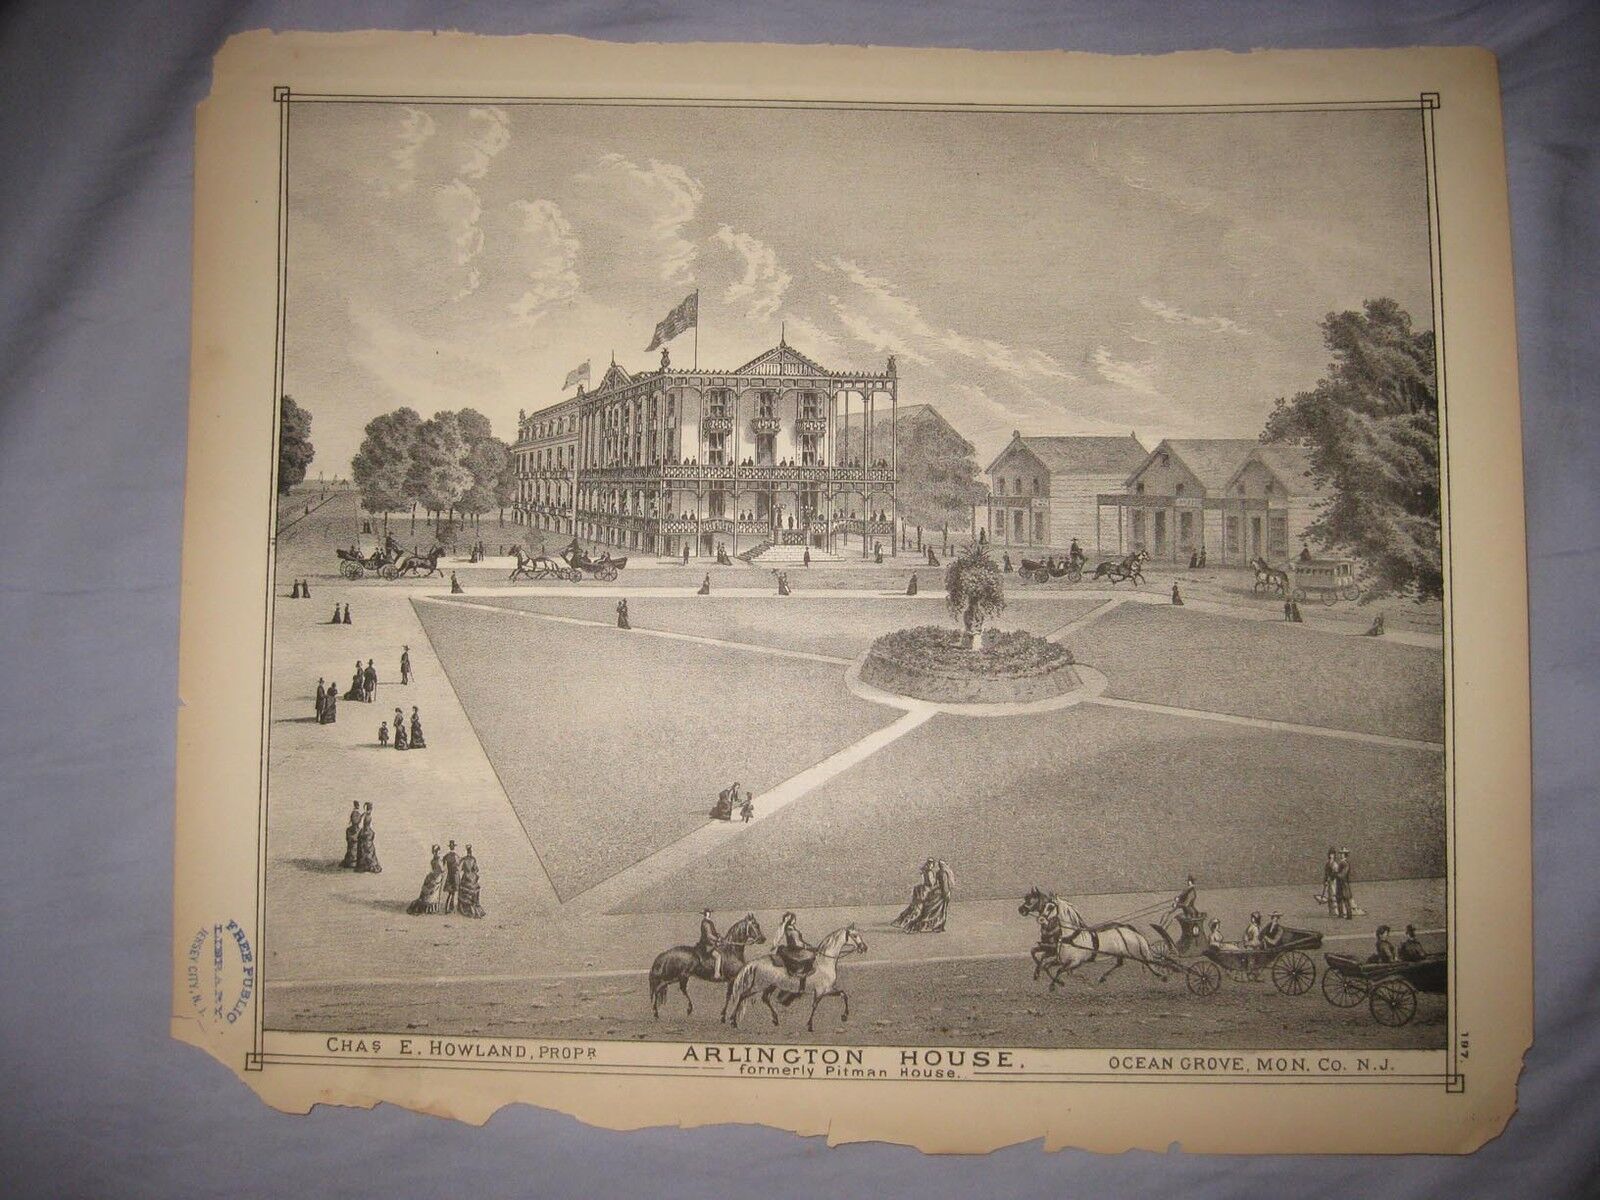 SUPERB ANTIQUE 1878 OCEAN GROVE NEW JERSEY LITHOGRAPH PRINT LARGE HOTEL FINE NR